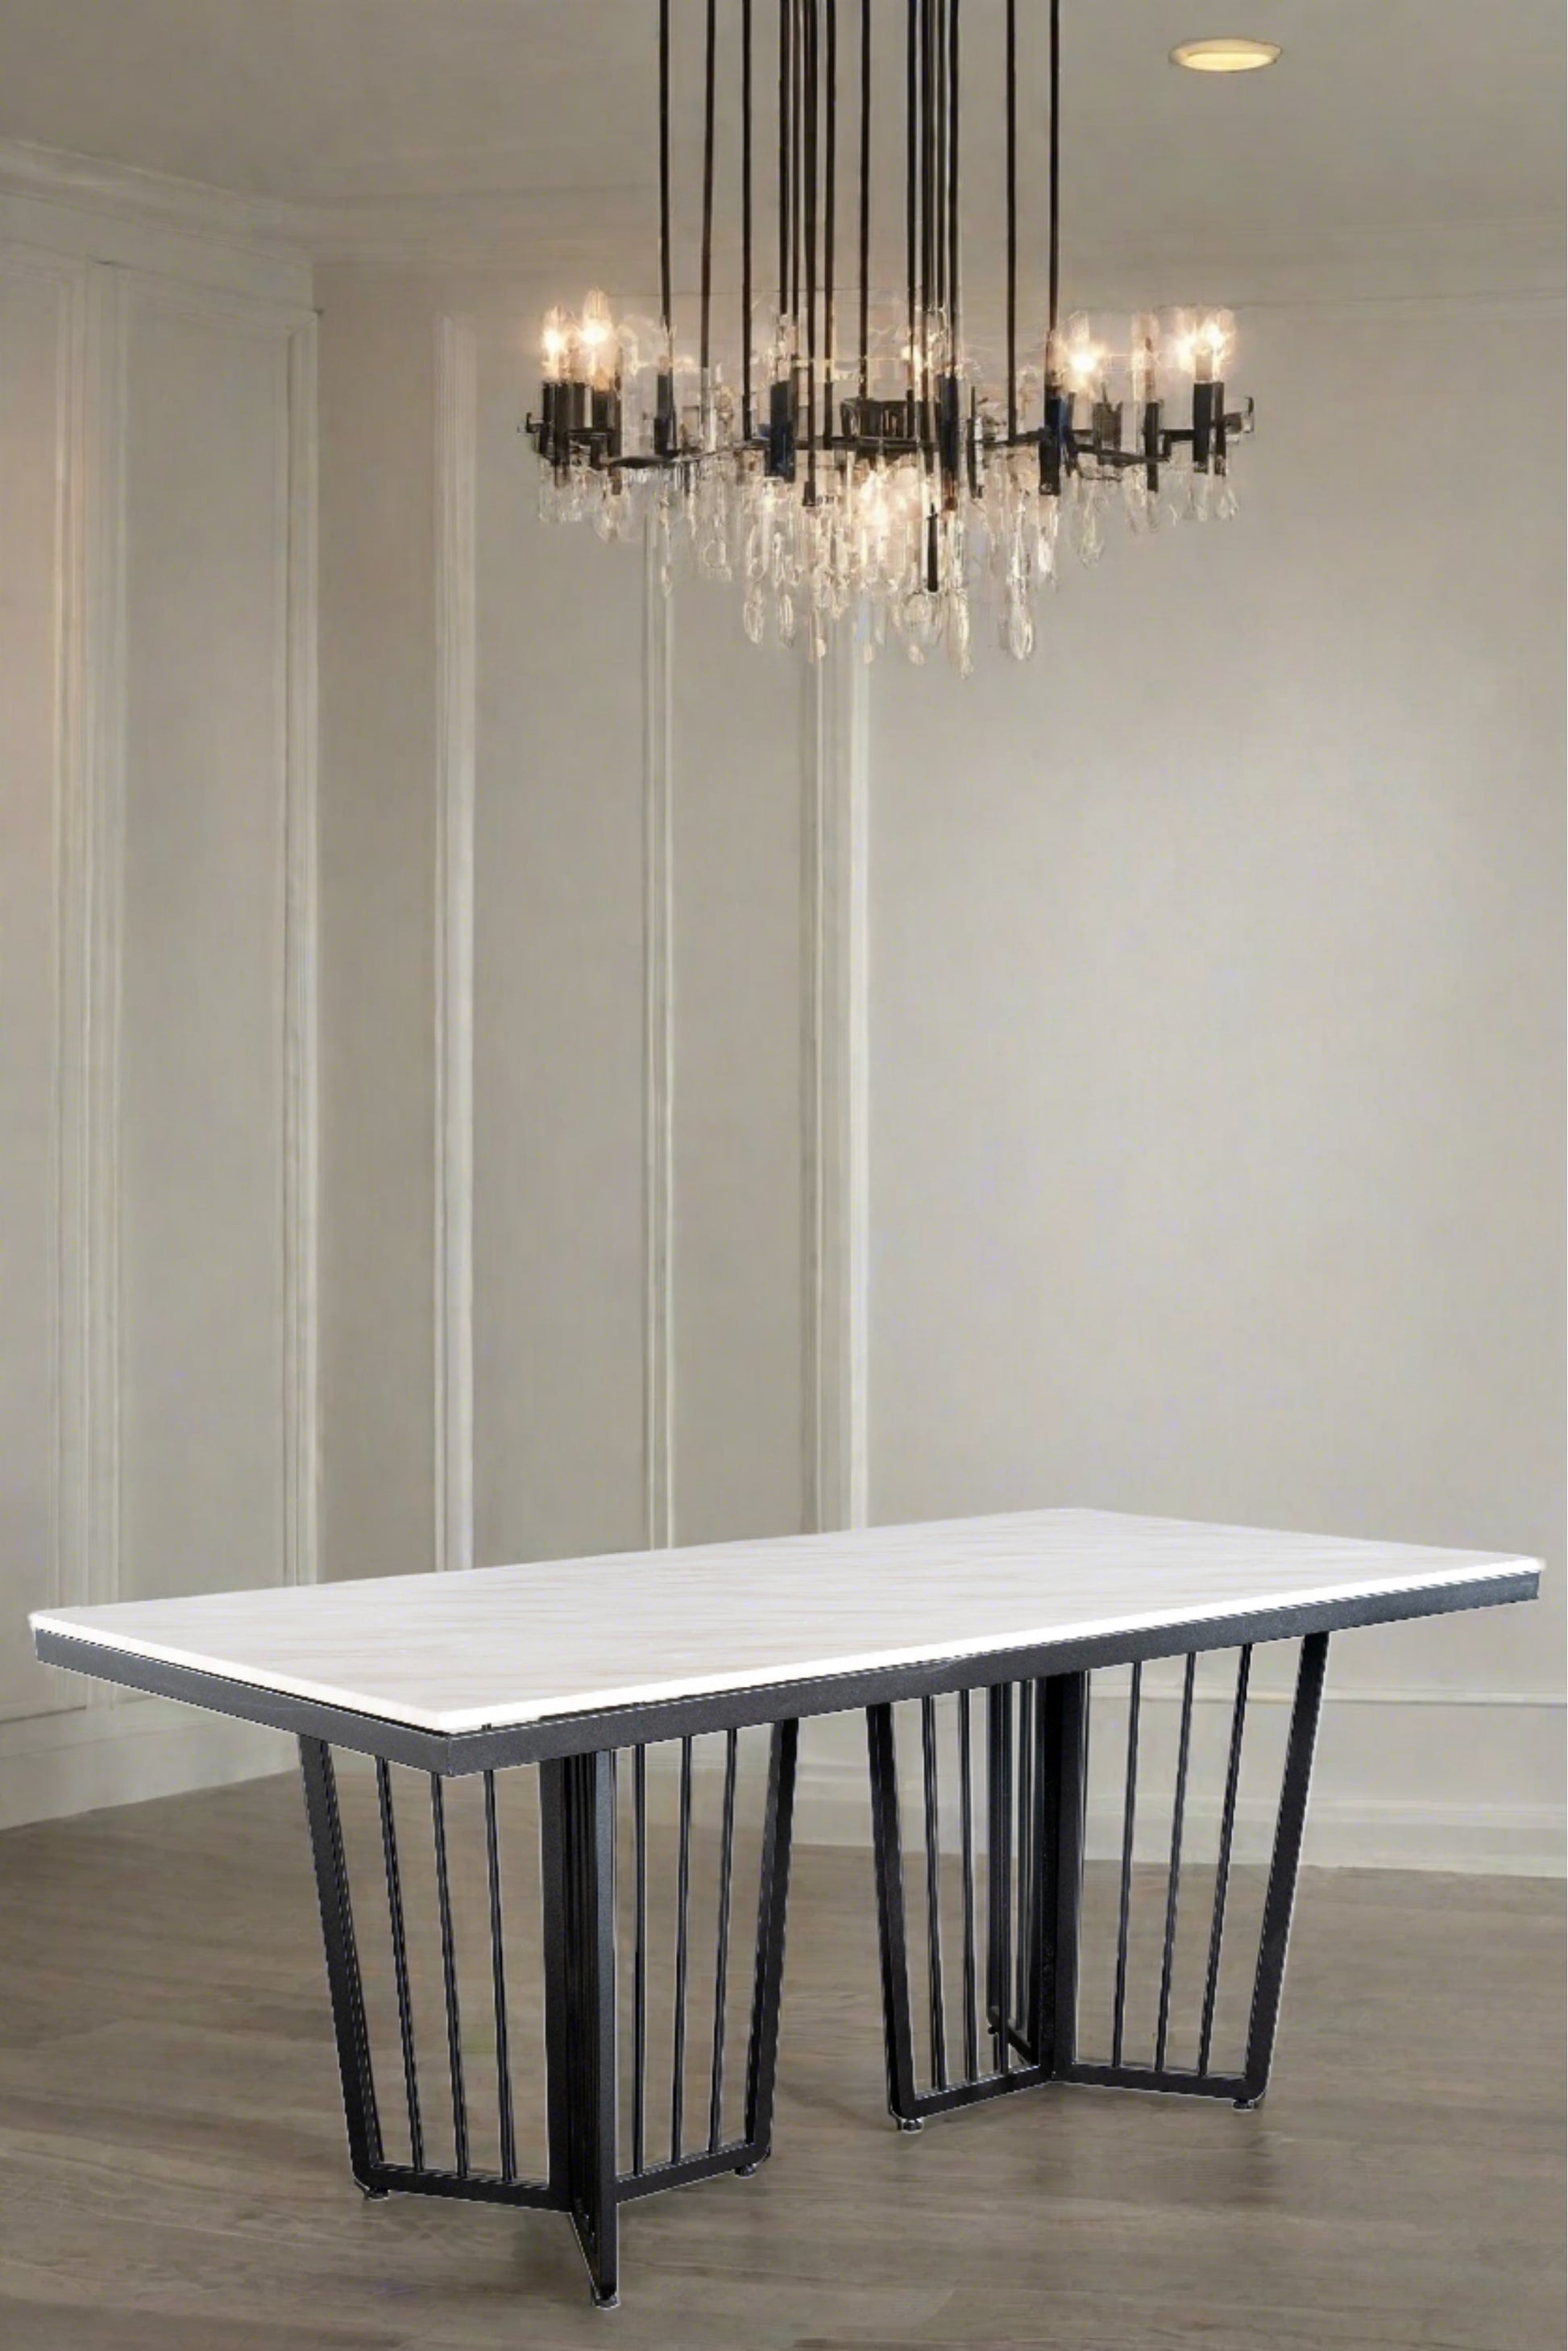 Architectural modern black dining table